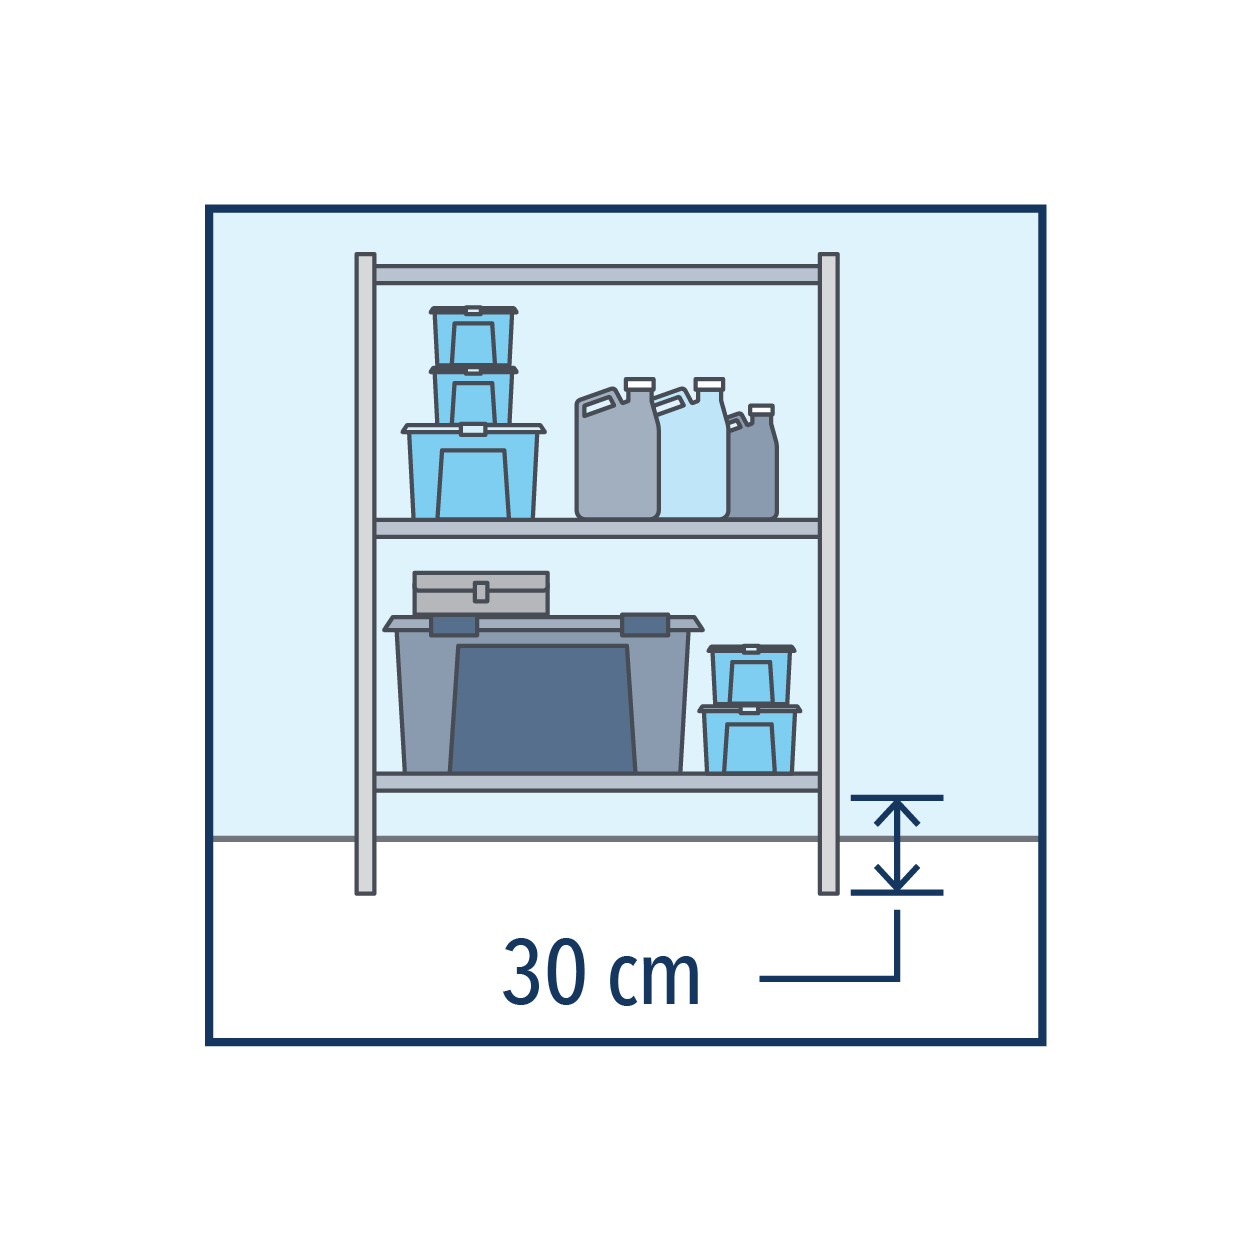 Shelf with valuables and a 30cm sign showing valuables should be elevated from the ground